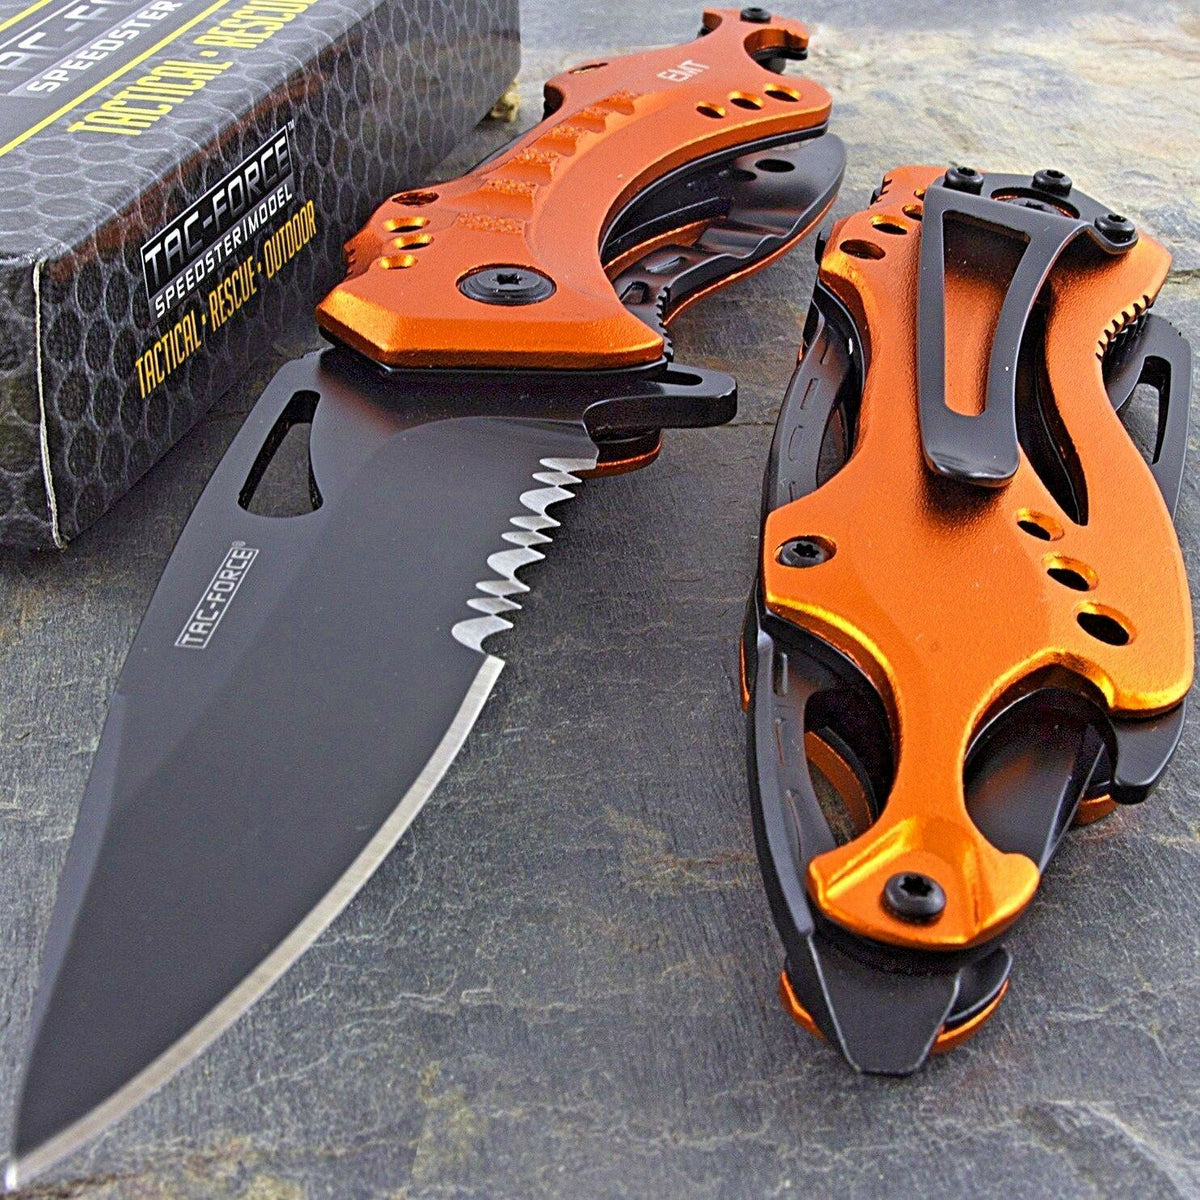 Military Tactical Camping Spring Open Assisted Folding Rescue Pocket Knife